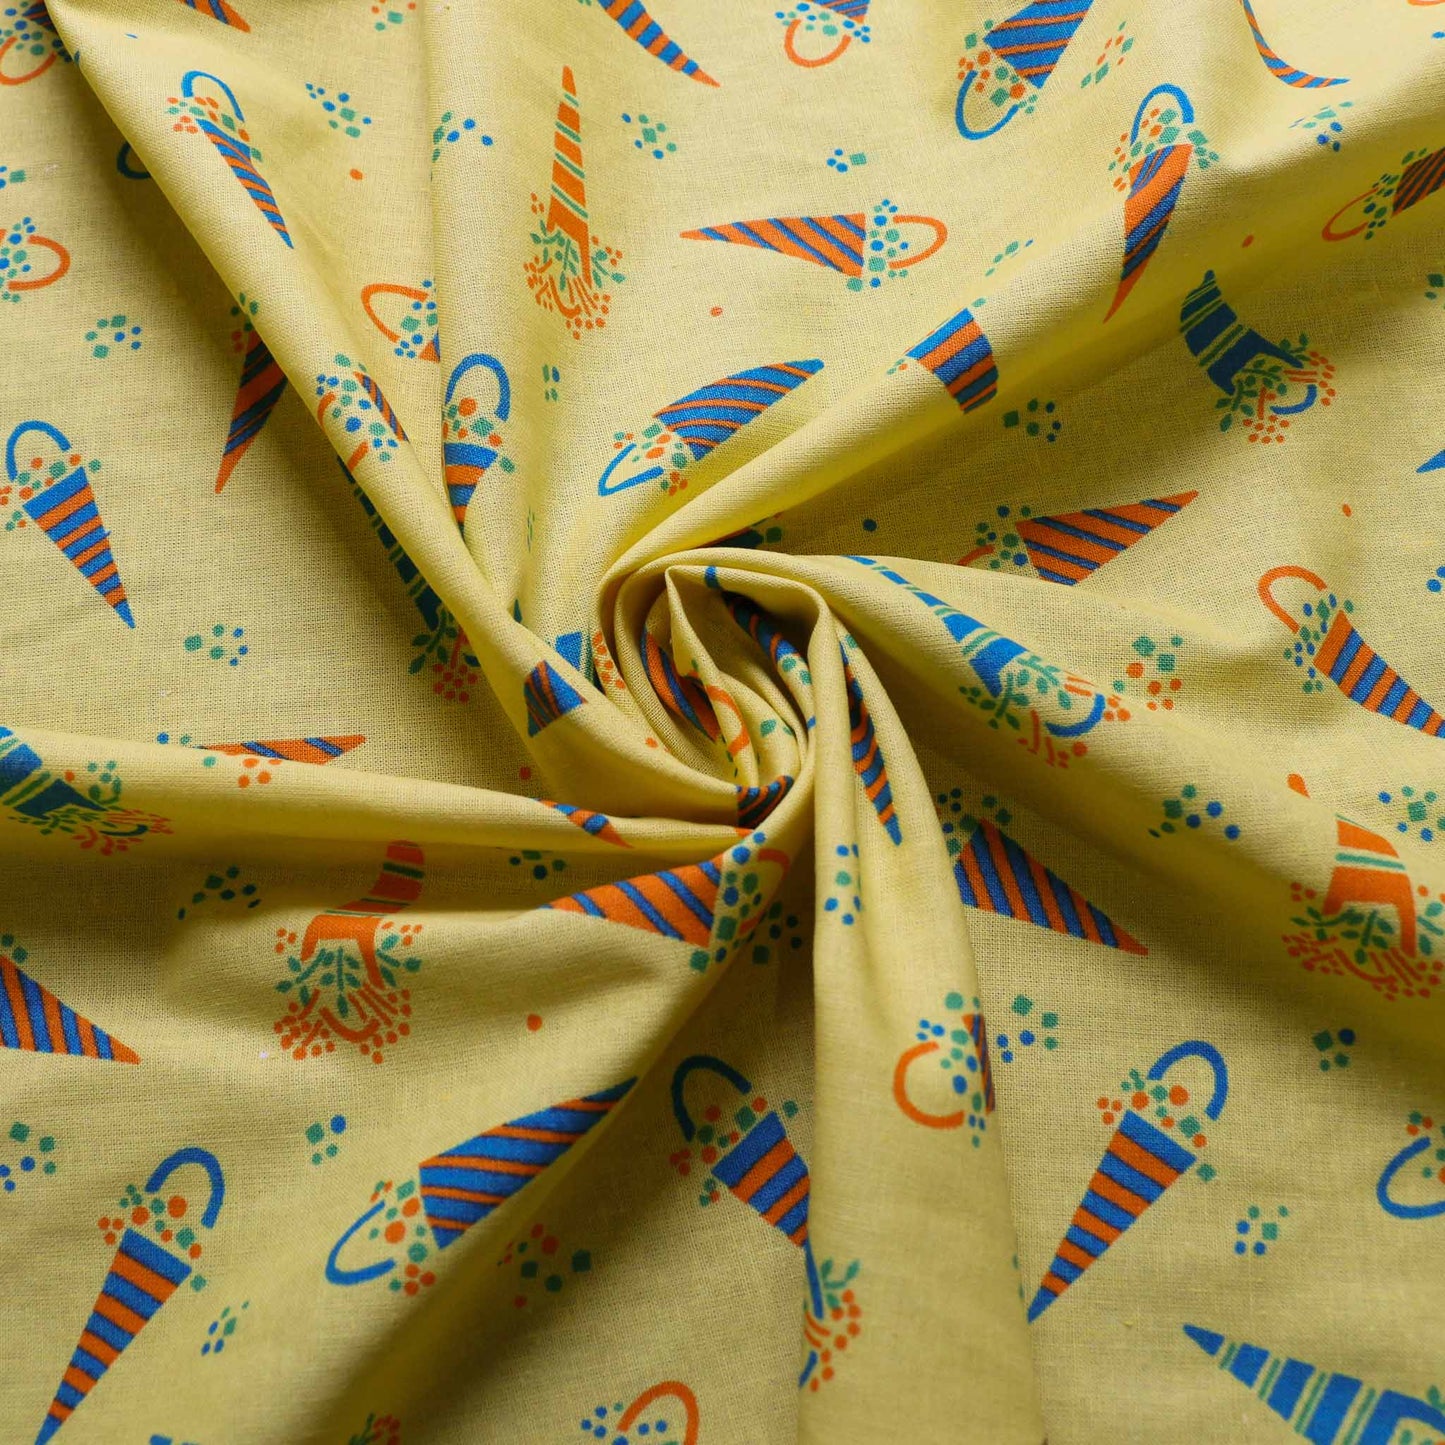 sustainable yellow retro cotton with hanging flower basket print